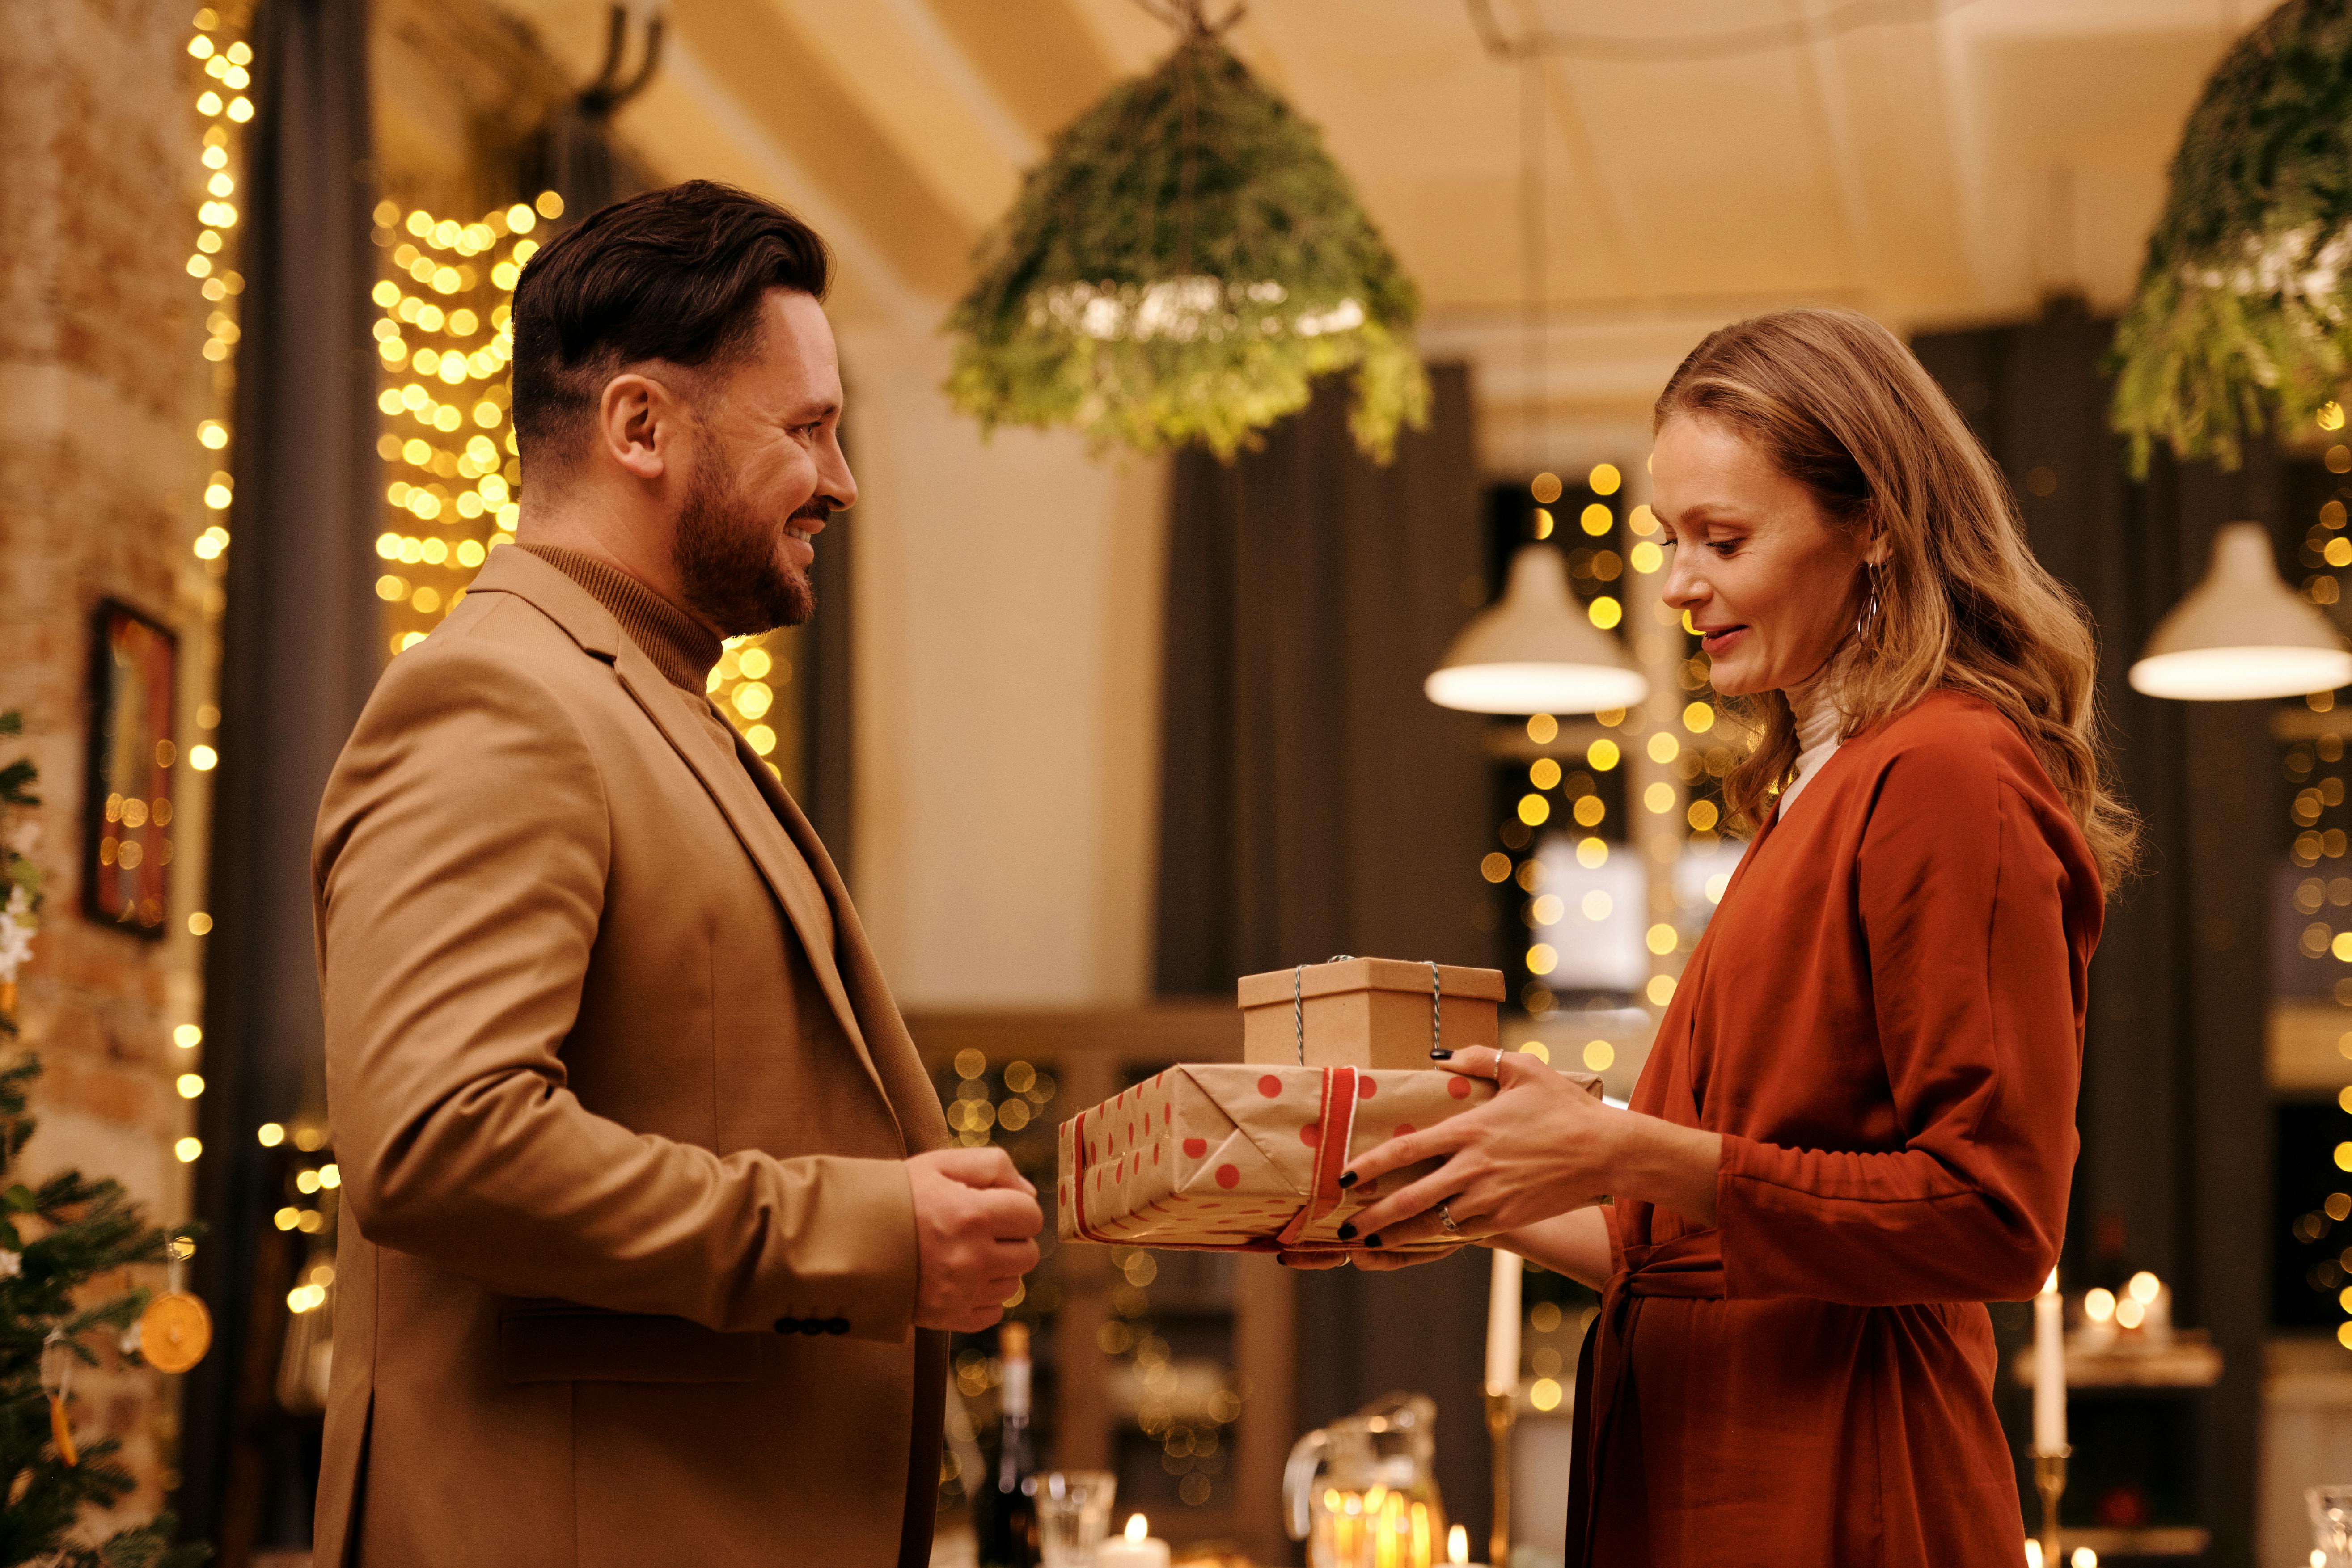 A woman holding gift boxes while standing in front of a man | Source: Pexels